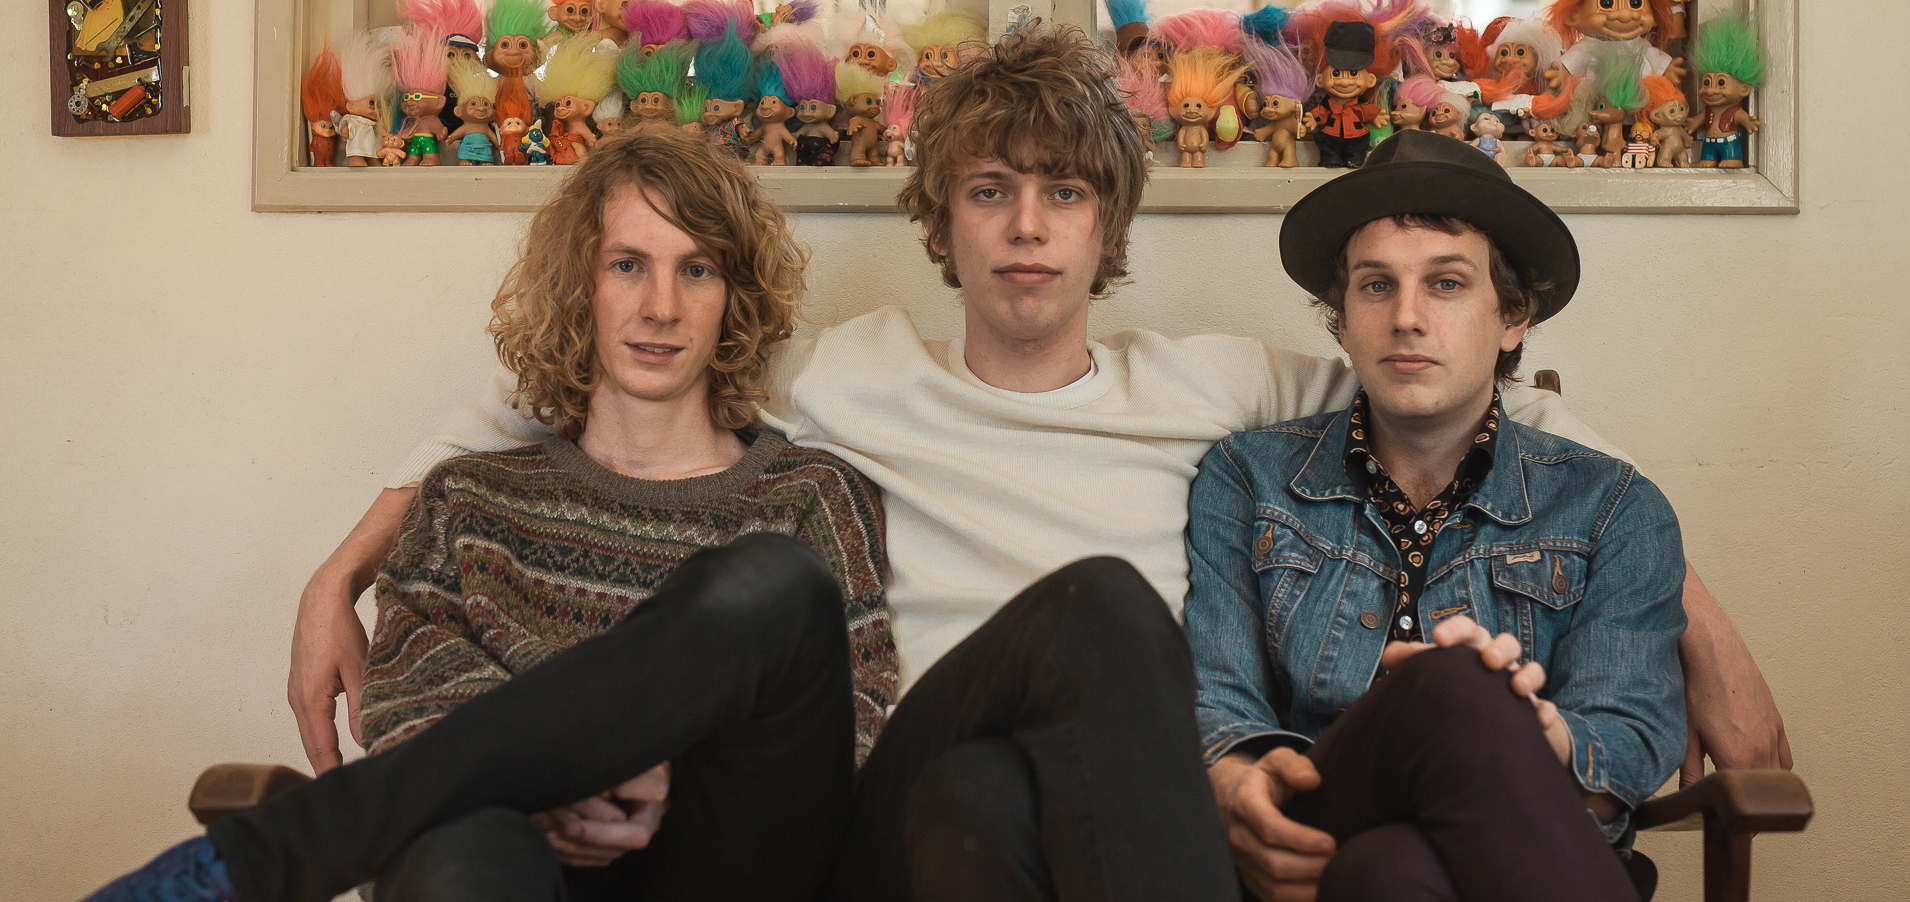 New Signings & Team-Ups: Three agency deals for Methyl Ethel; Kiss go on a wanderer; Bedlam takes on Kaleidoscope; Industry fights men’s violence against women